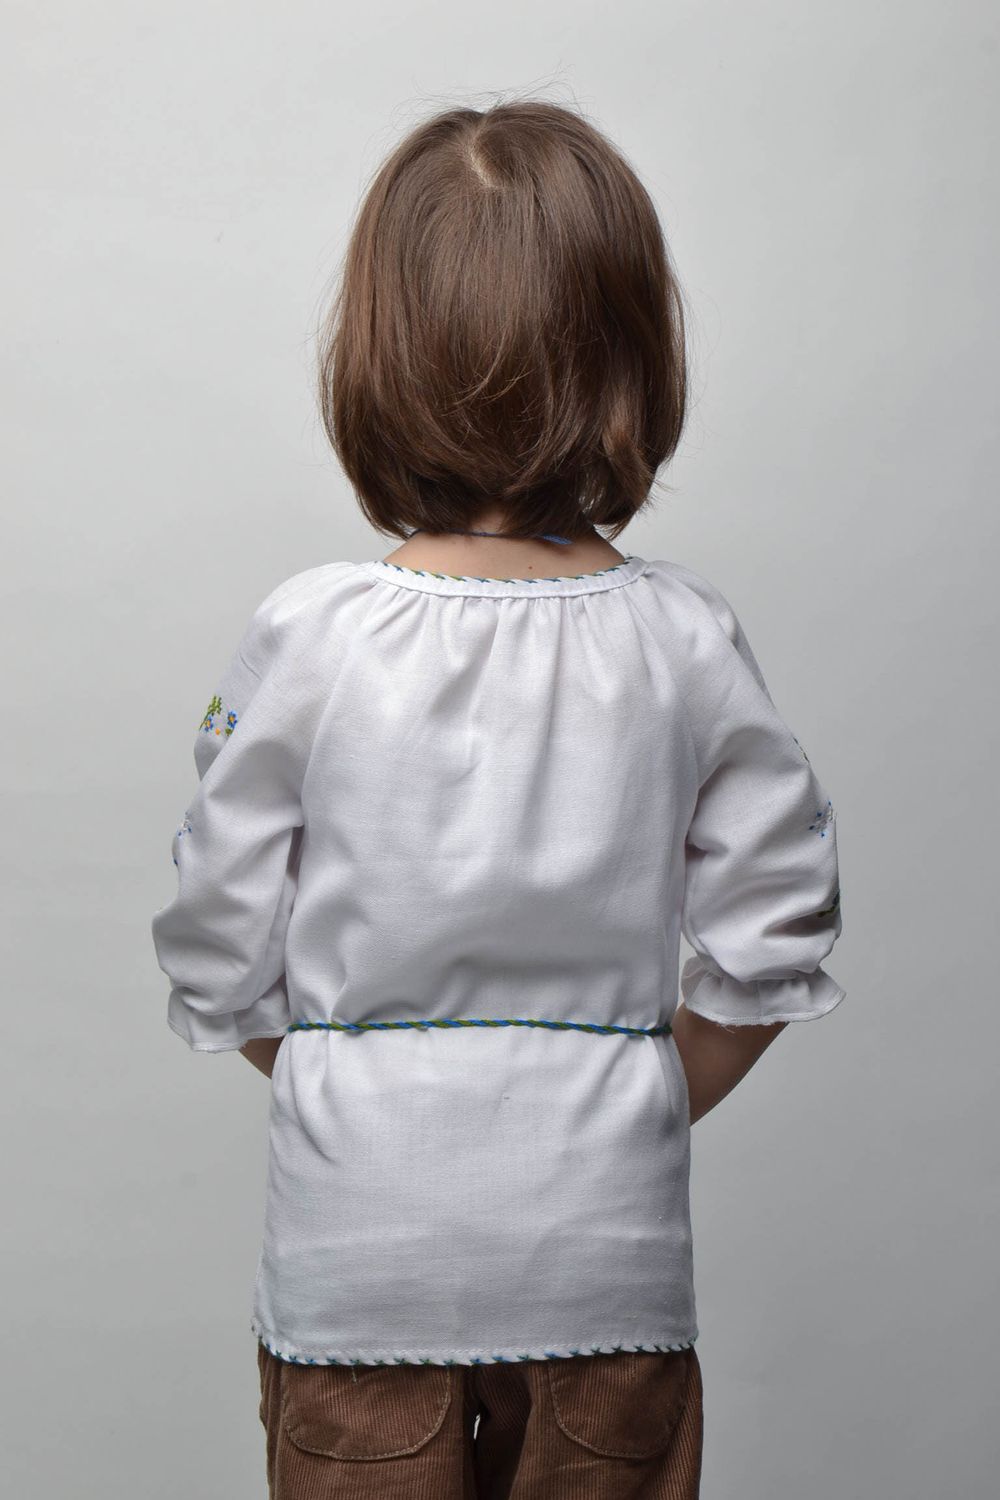 Ethnic embroidered shirt for 5-7 years old girl photo 4